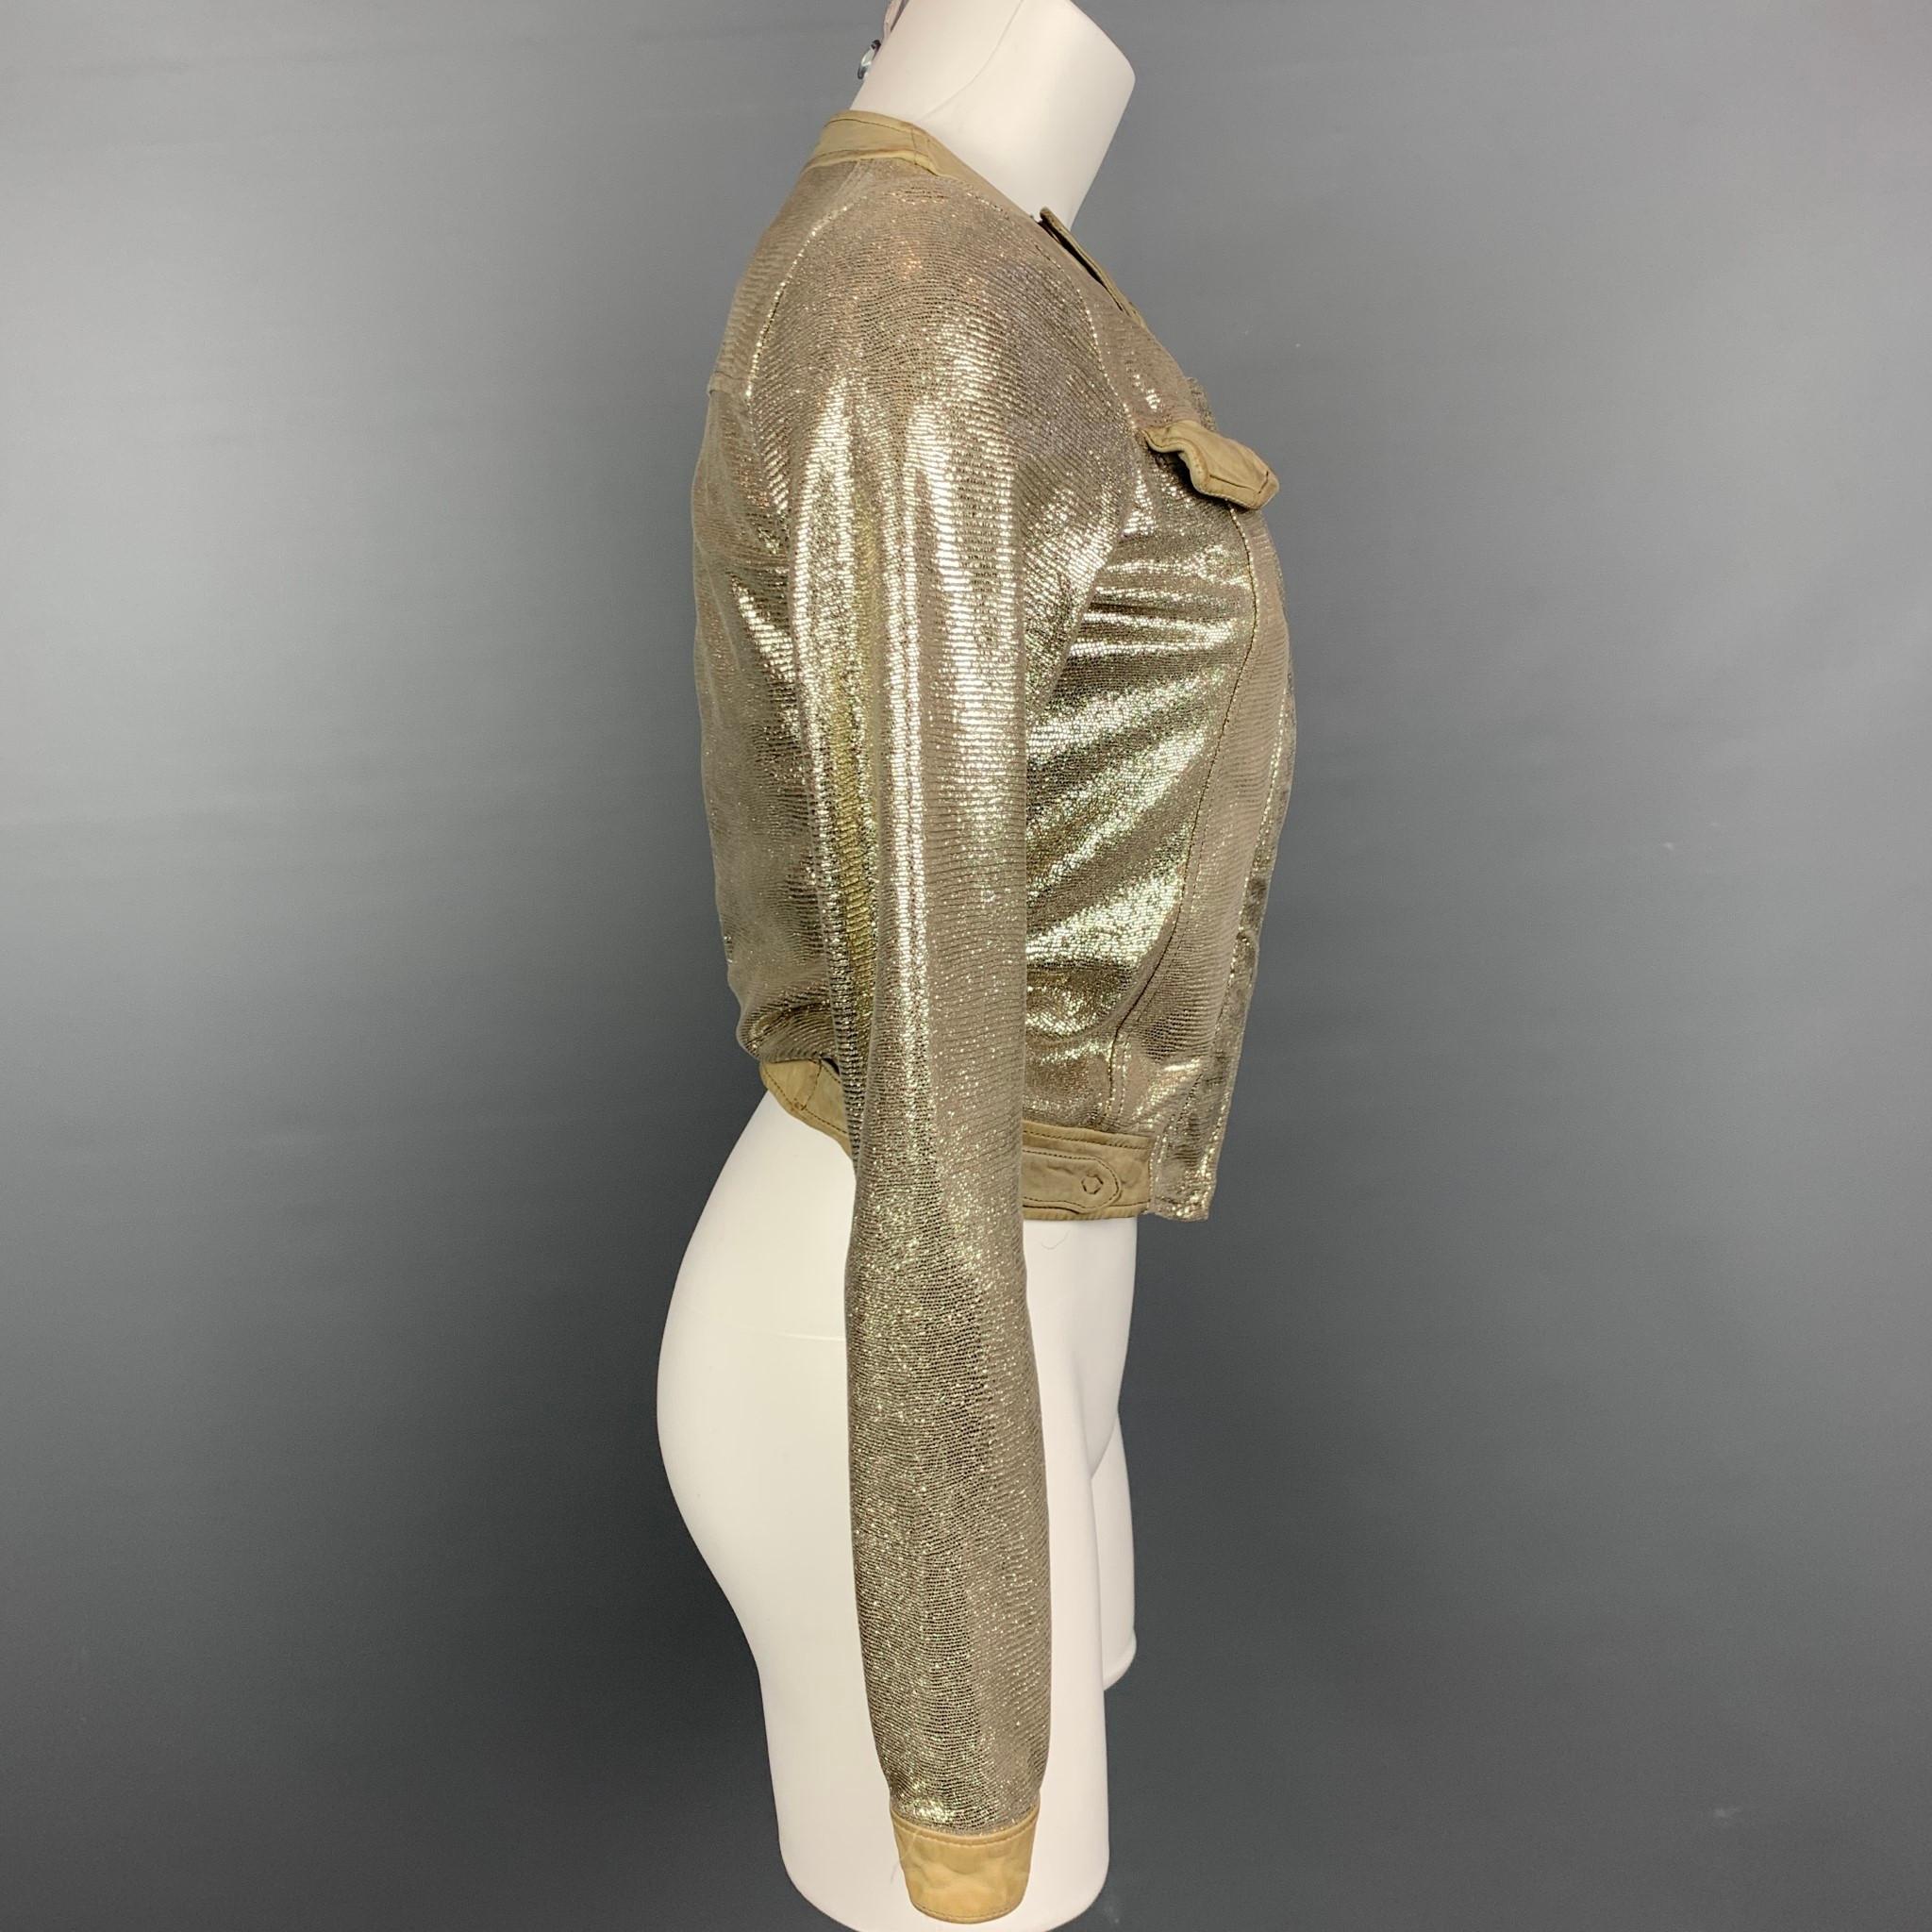 GIORGIO BRATO jacket comes in a taupe metallic textured leather featuring a collarless style, flap pockets, and a hidden zip up closure. Made in Italy.

Good Pre-Owned Condition.
Marked: 40

Measurements:

Shoulder: 14 in.
Bust: 32 in.
Sleeve: 26